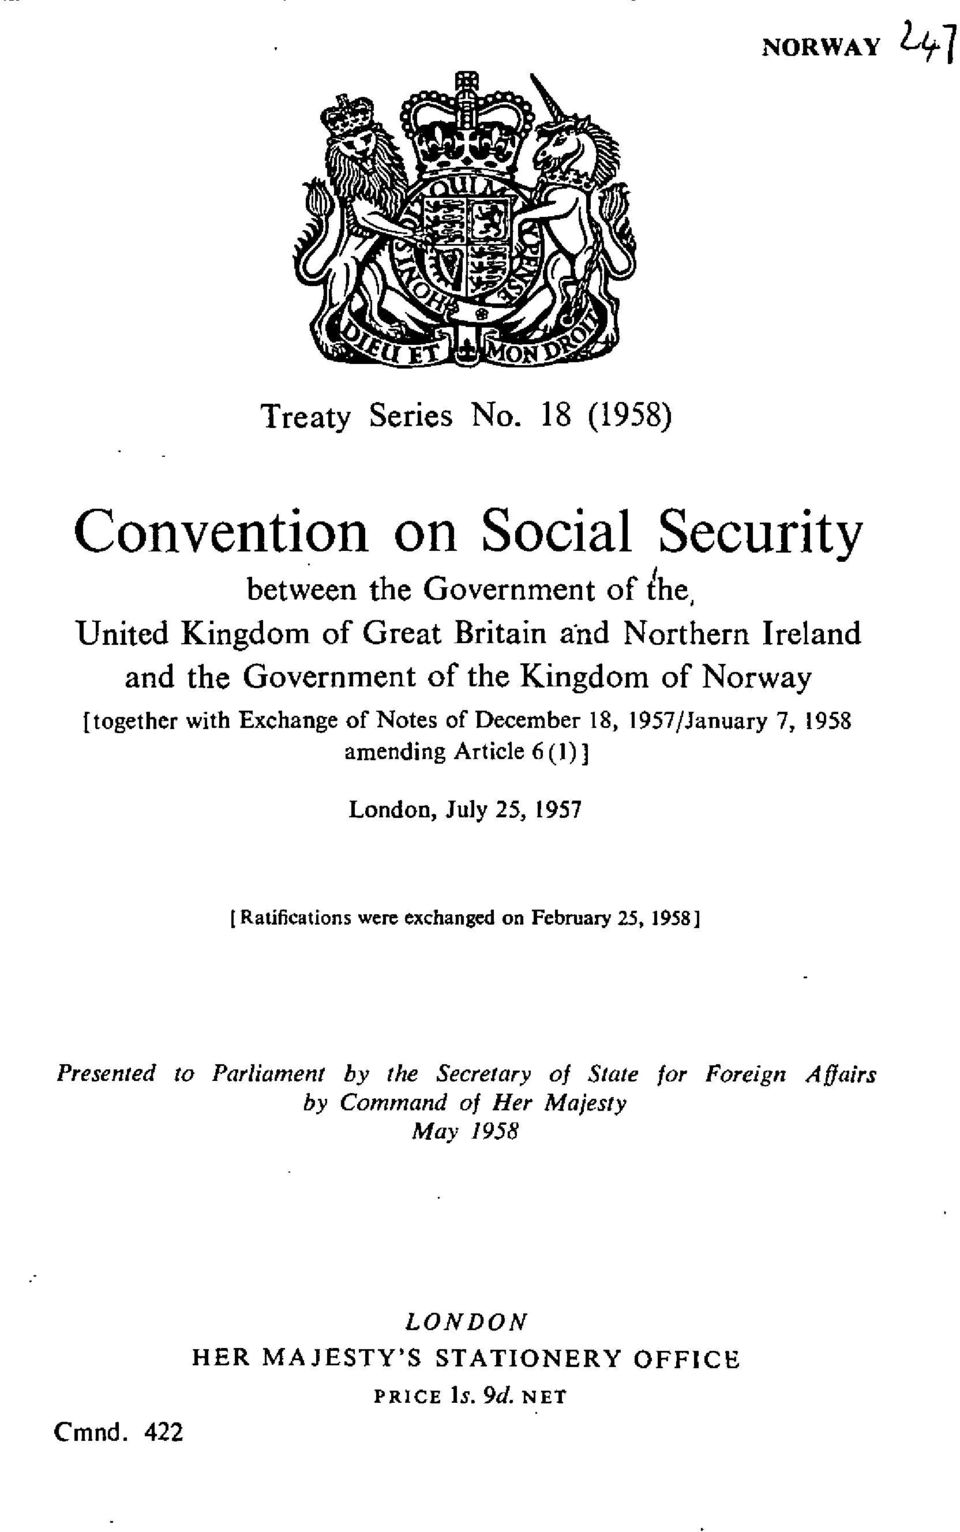 Government of the Kingdom of Norway [ together with Exchange of Notes of December 18, 1957 /January 7, 1958 amending Article 6 (1) ]